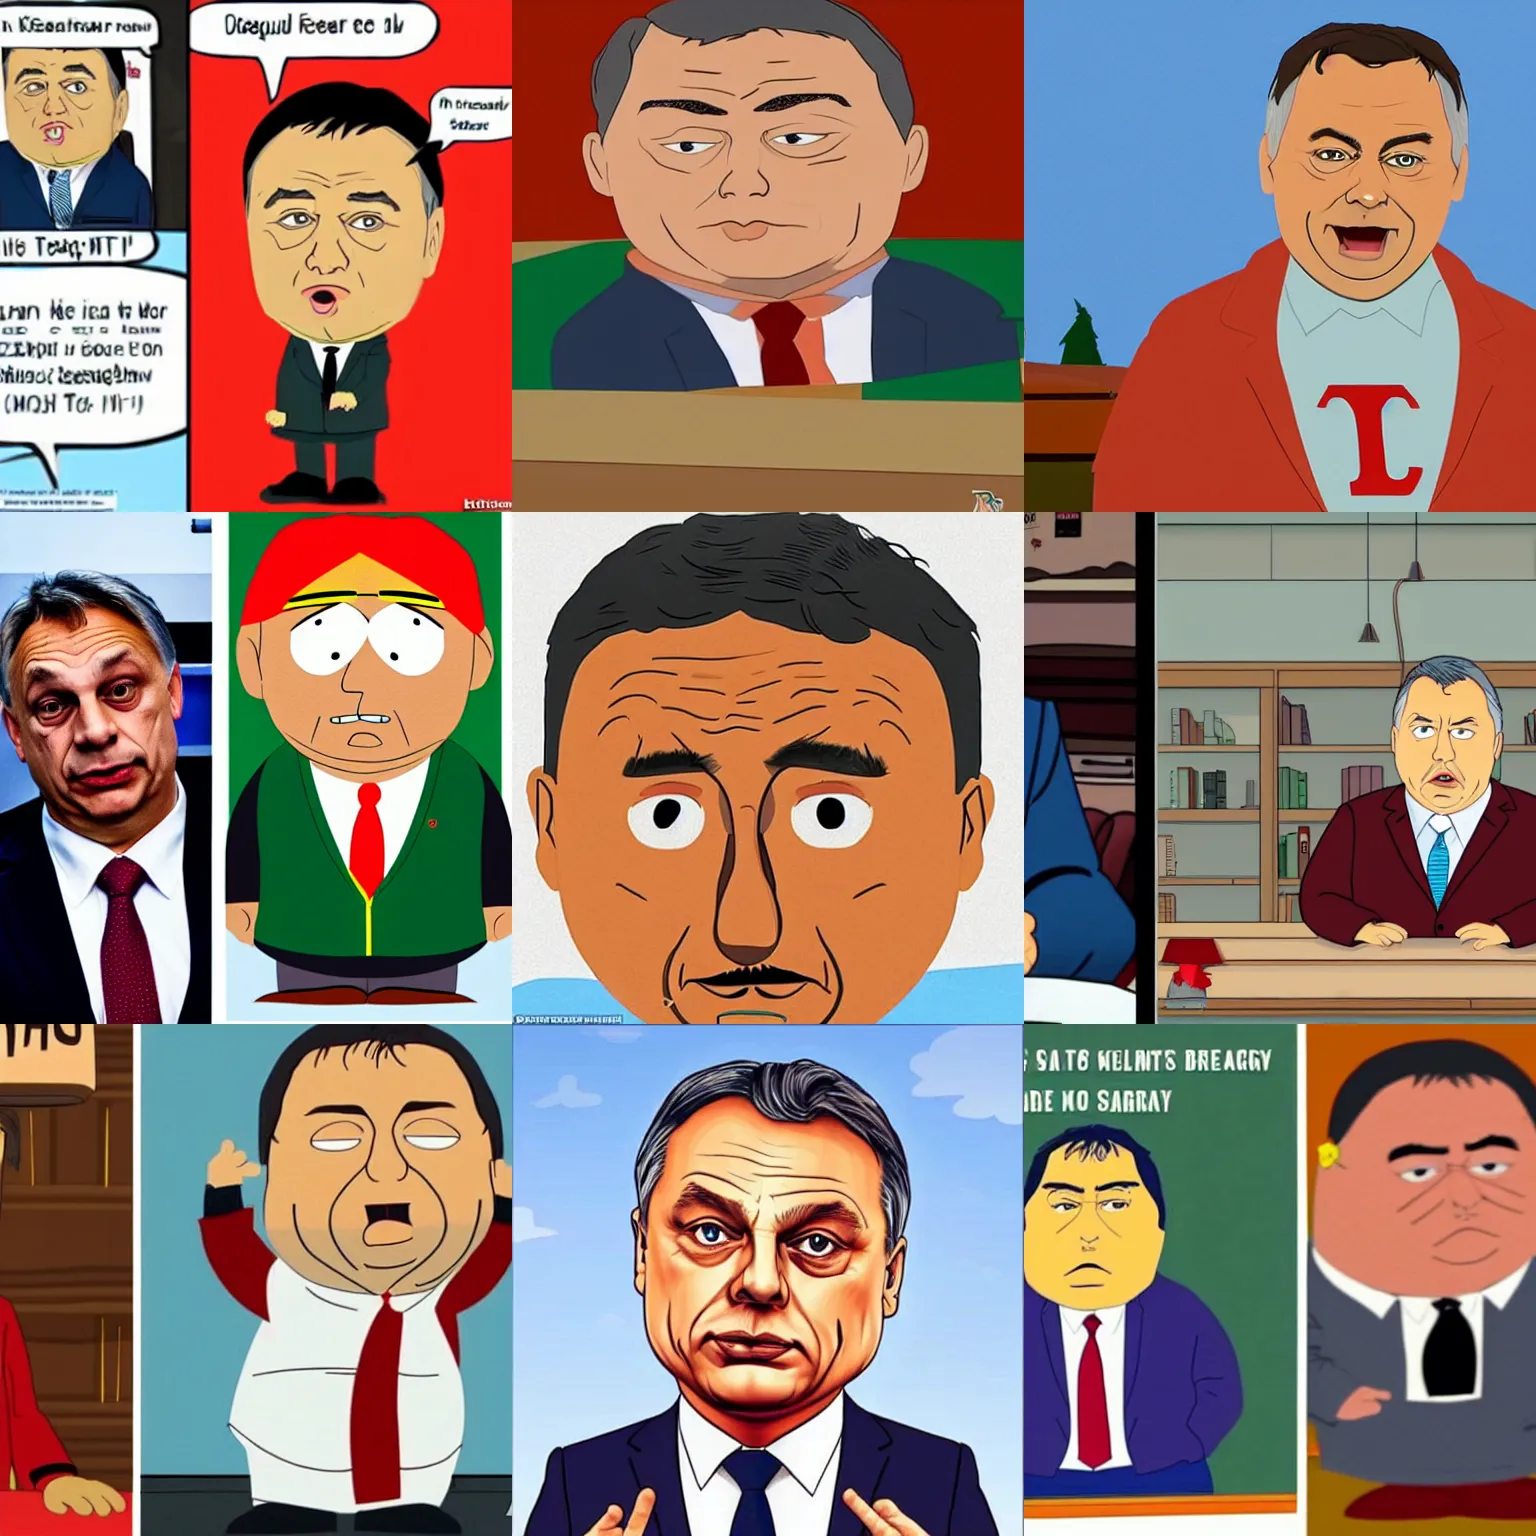 Prompt: hungarian prime minister viktor orban portrayed by kenny from south park, in the style of south park cartoon